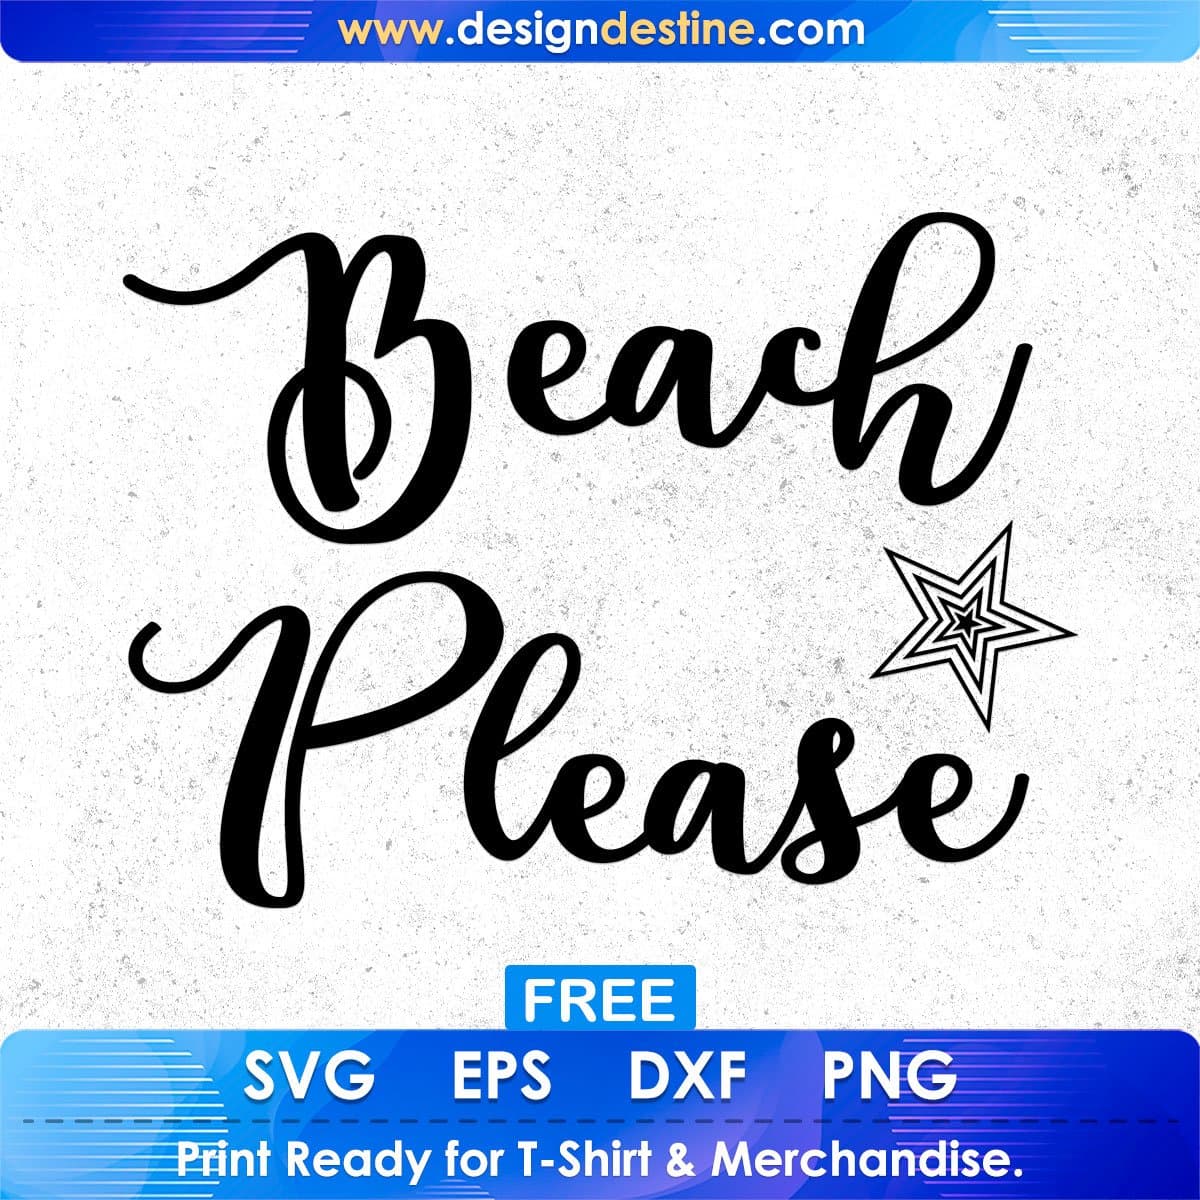 Beach Please Summer T shirt Design In Svg Png Cutting Printable Files